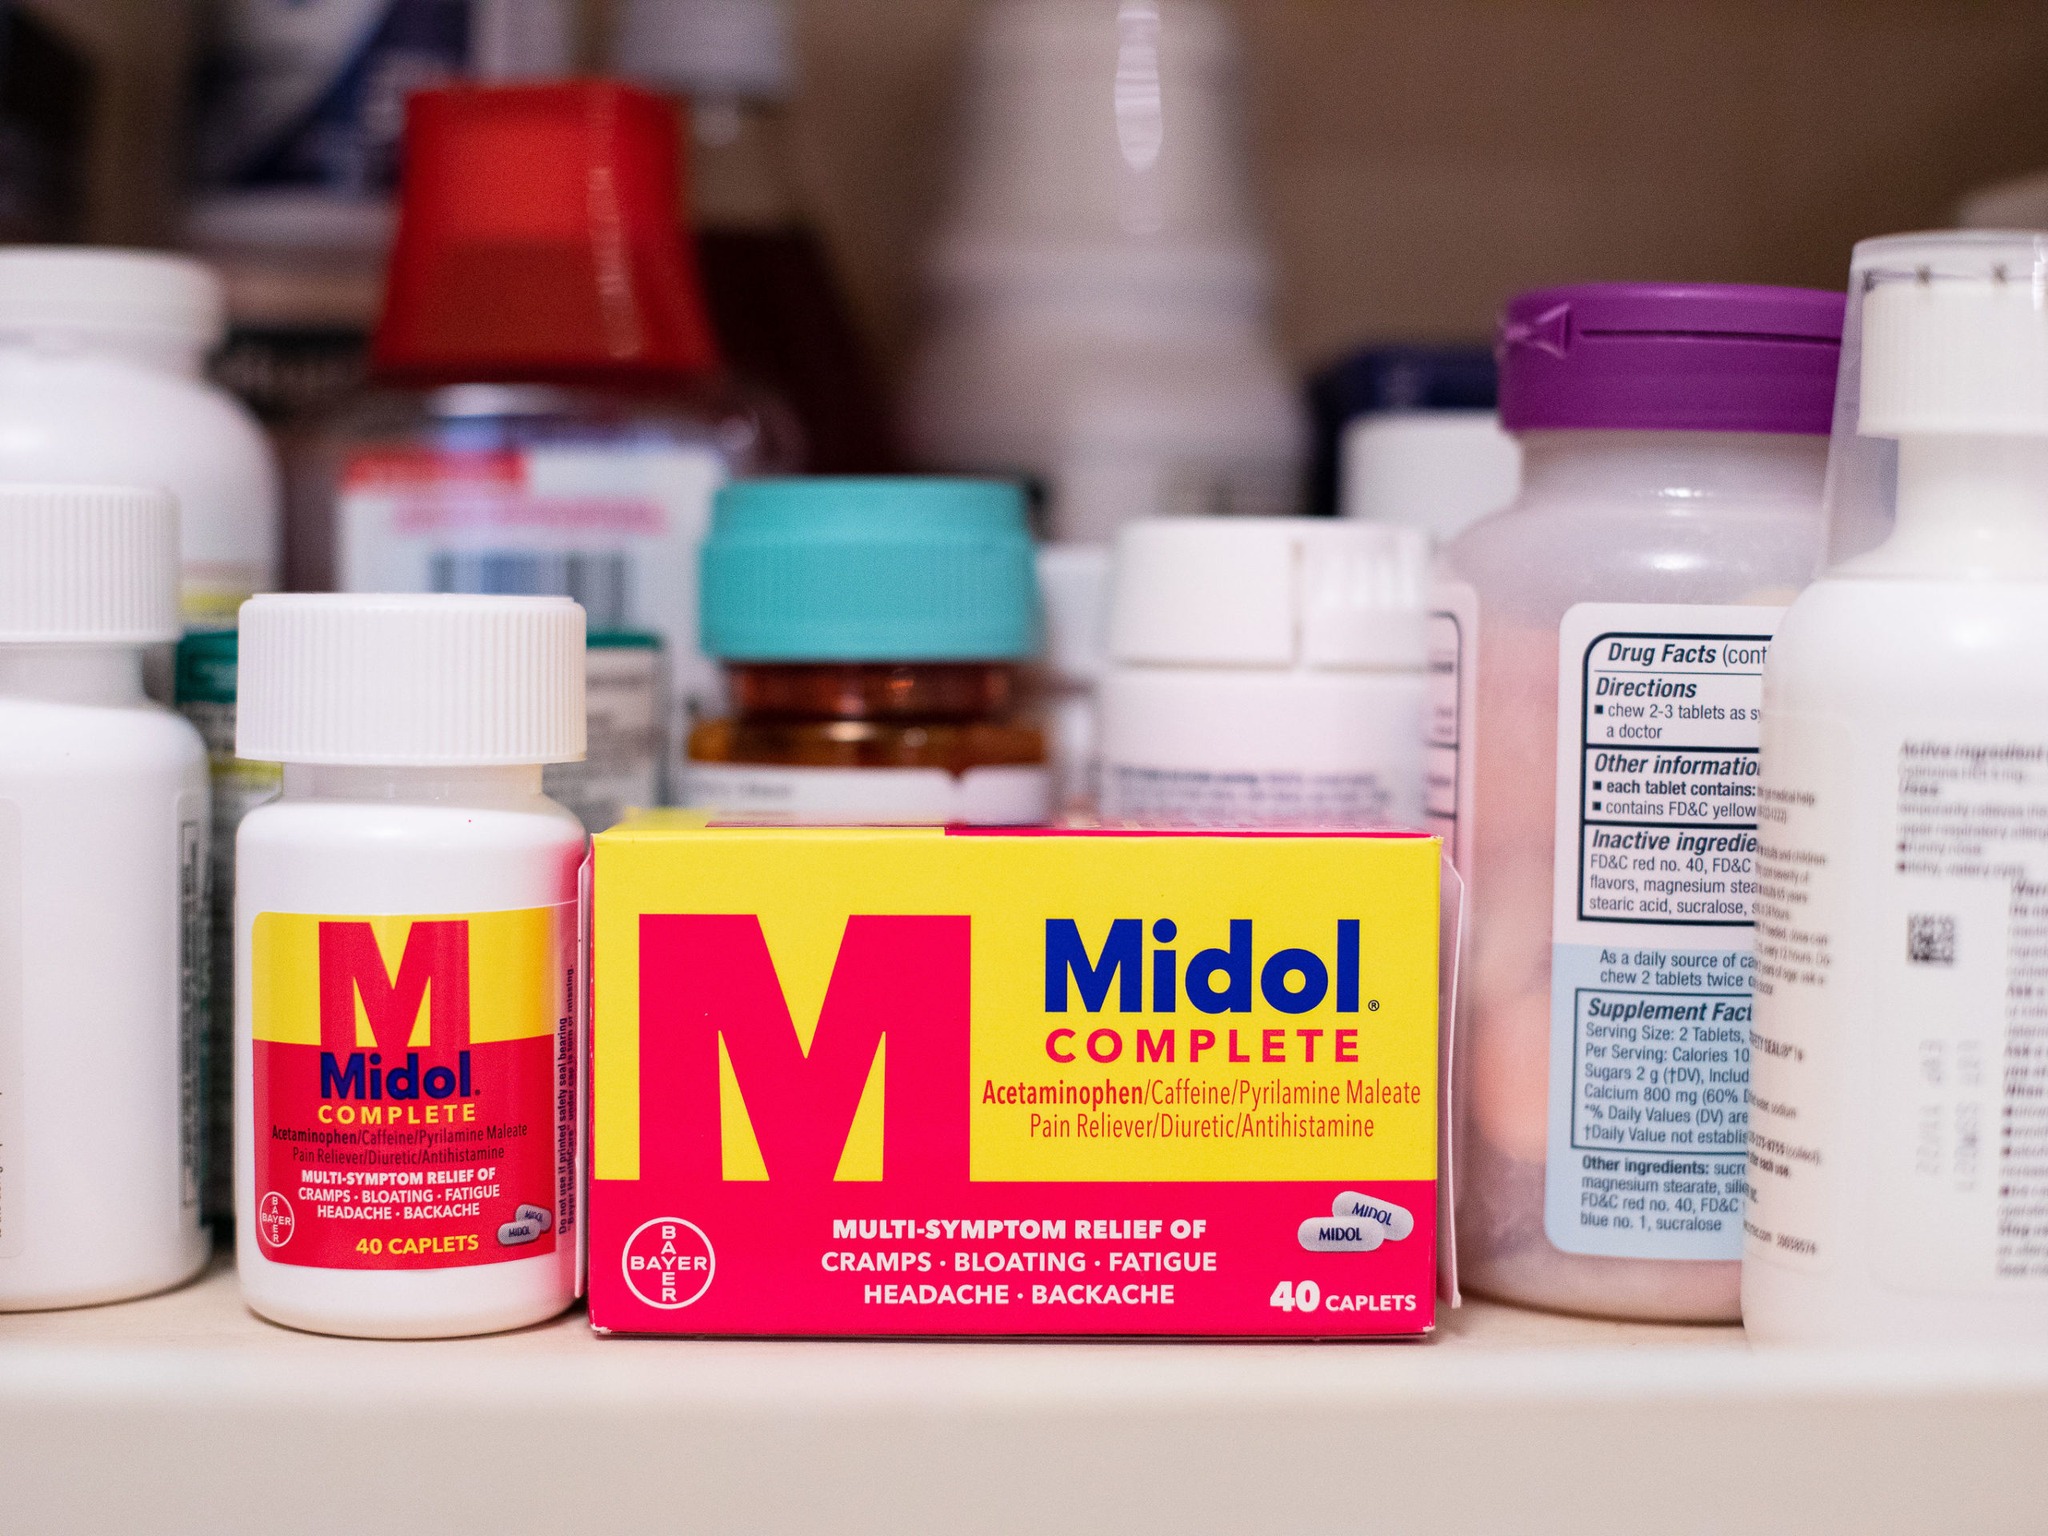 Get Midol For Just $4.69 At Publix (Regular Price $7.69)